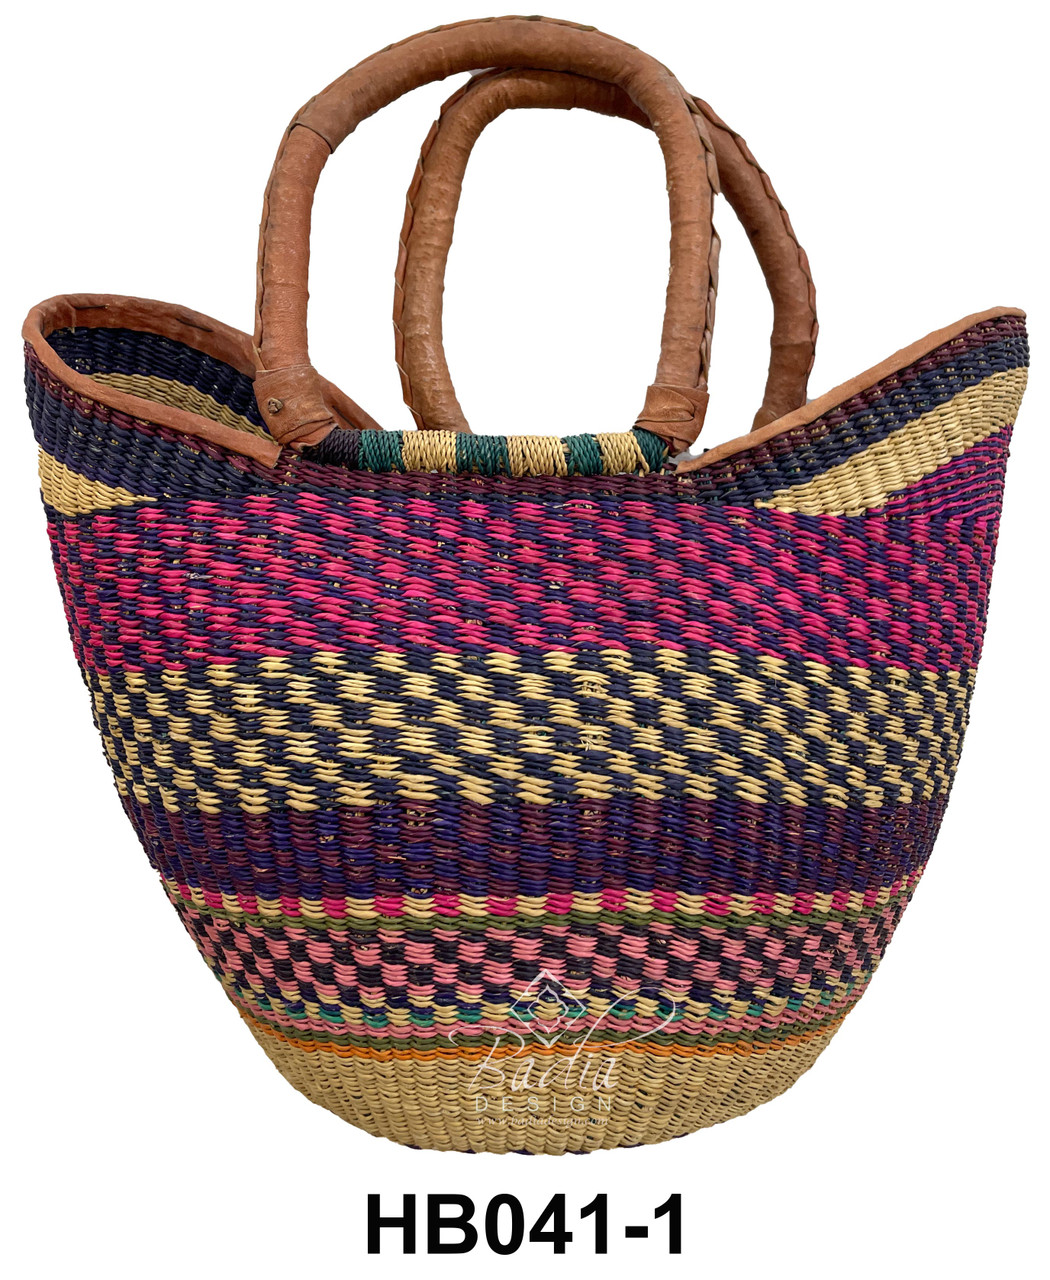 African Handwoven Straw Bags - HB041